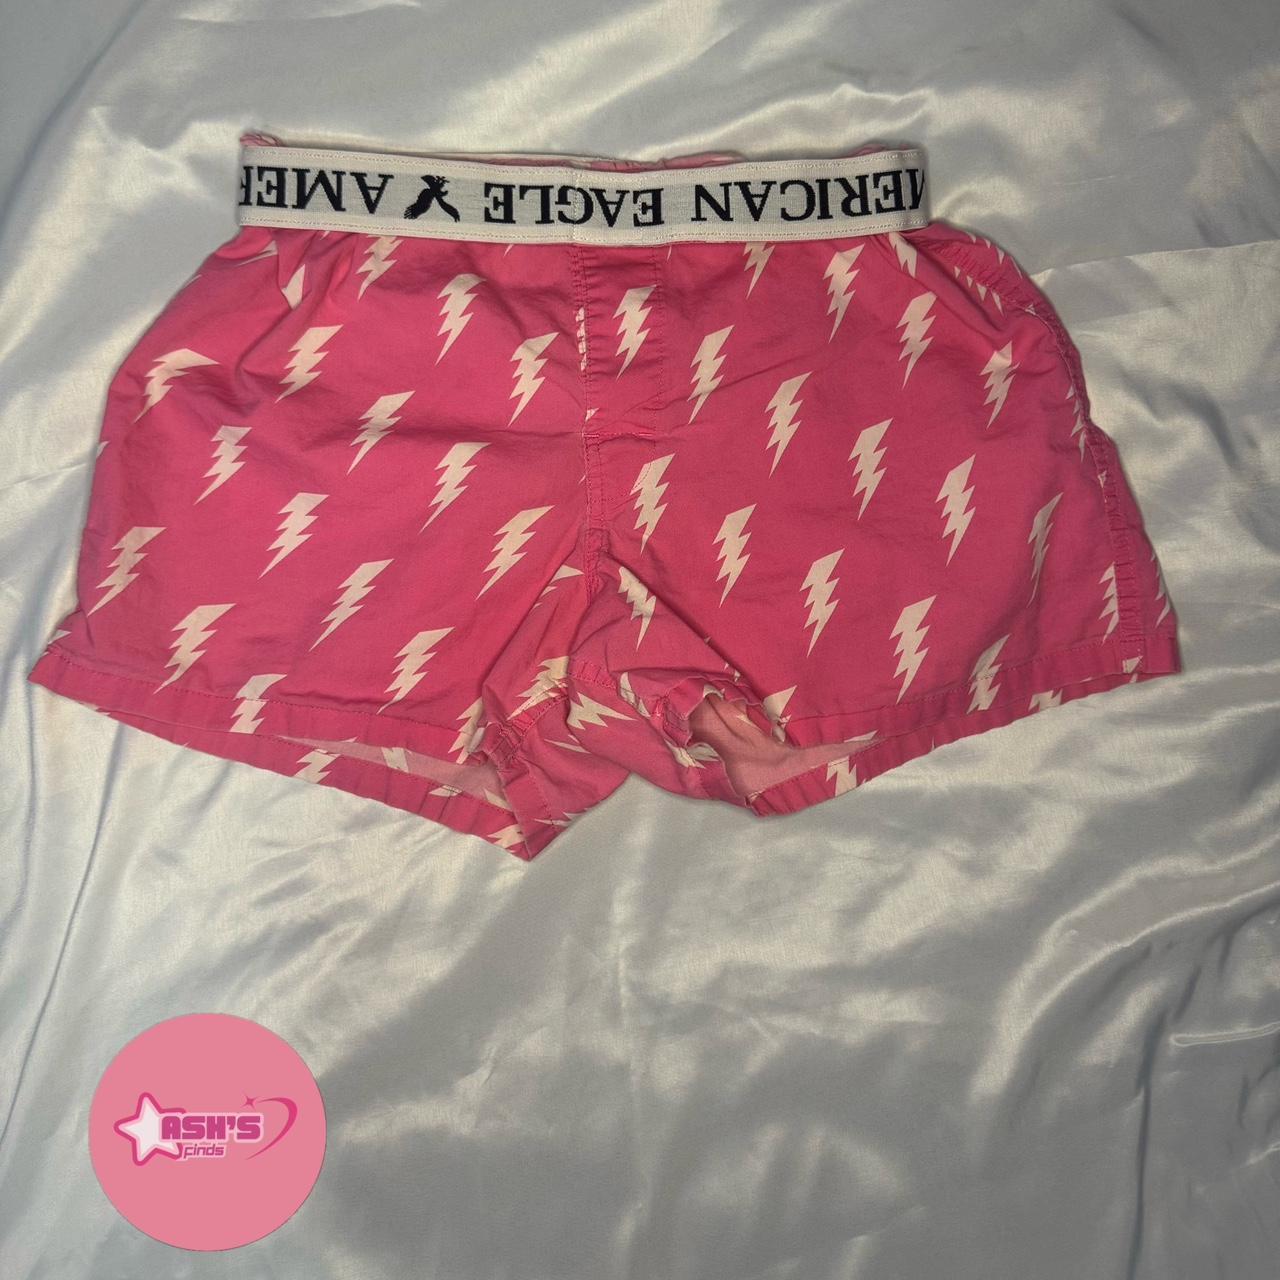 You are viewing 2 pairs of SAXX Boxer Briefs in - Depop